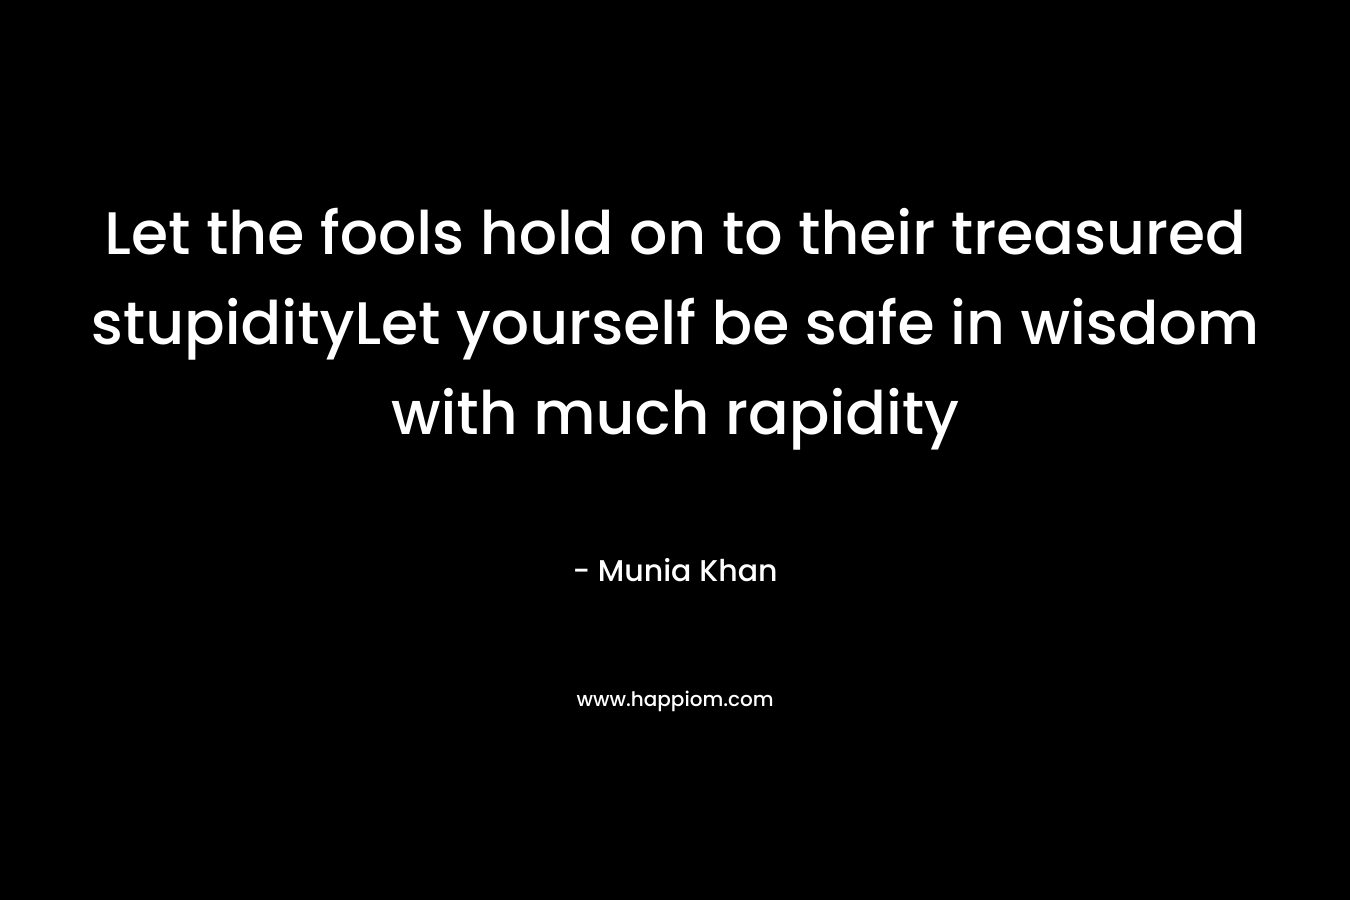 Let the fools hold on to their treasured stupidityLet yourself be safe in wisdom with much rapidity